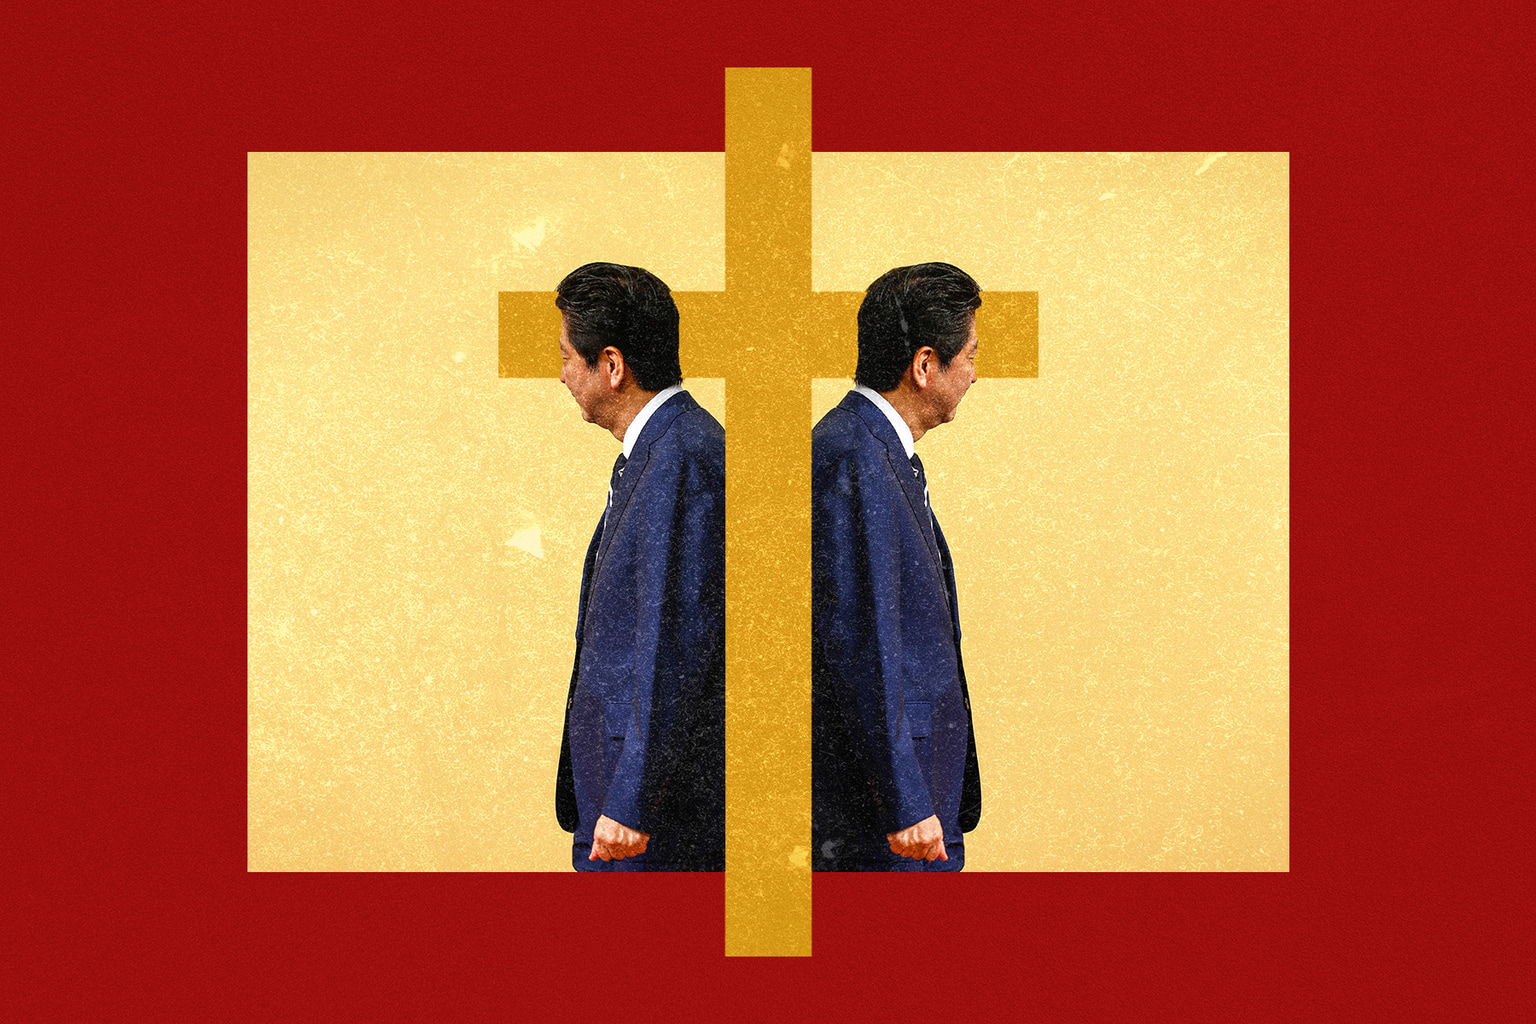 News Roundup: Unification Church Attempts to Distance Itself from Killing of Shinzo Abe